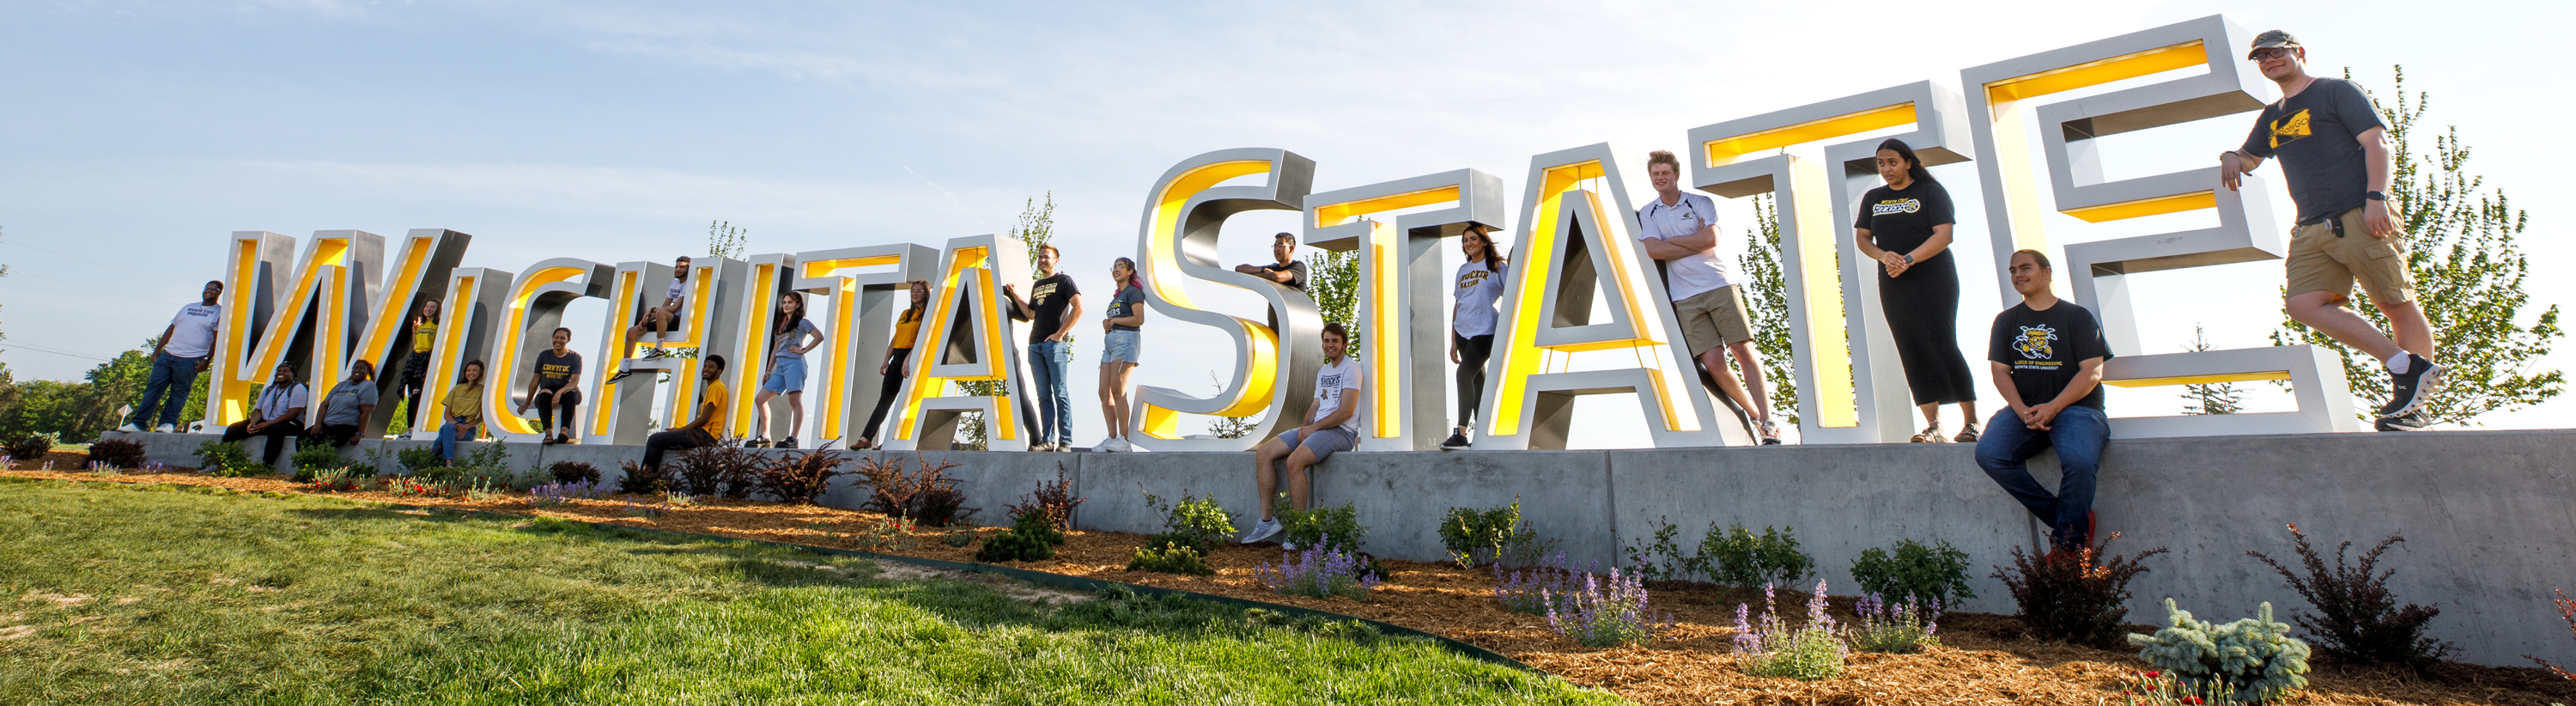 WSU Sign with students